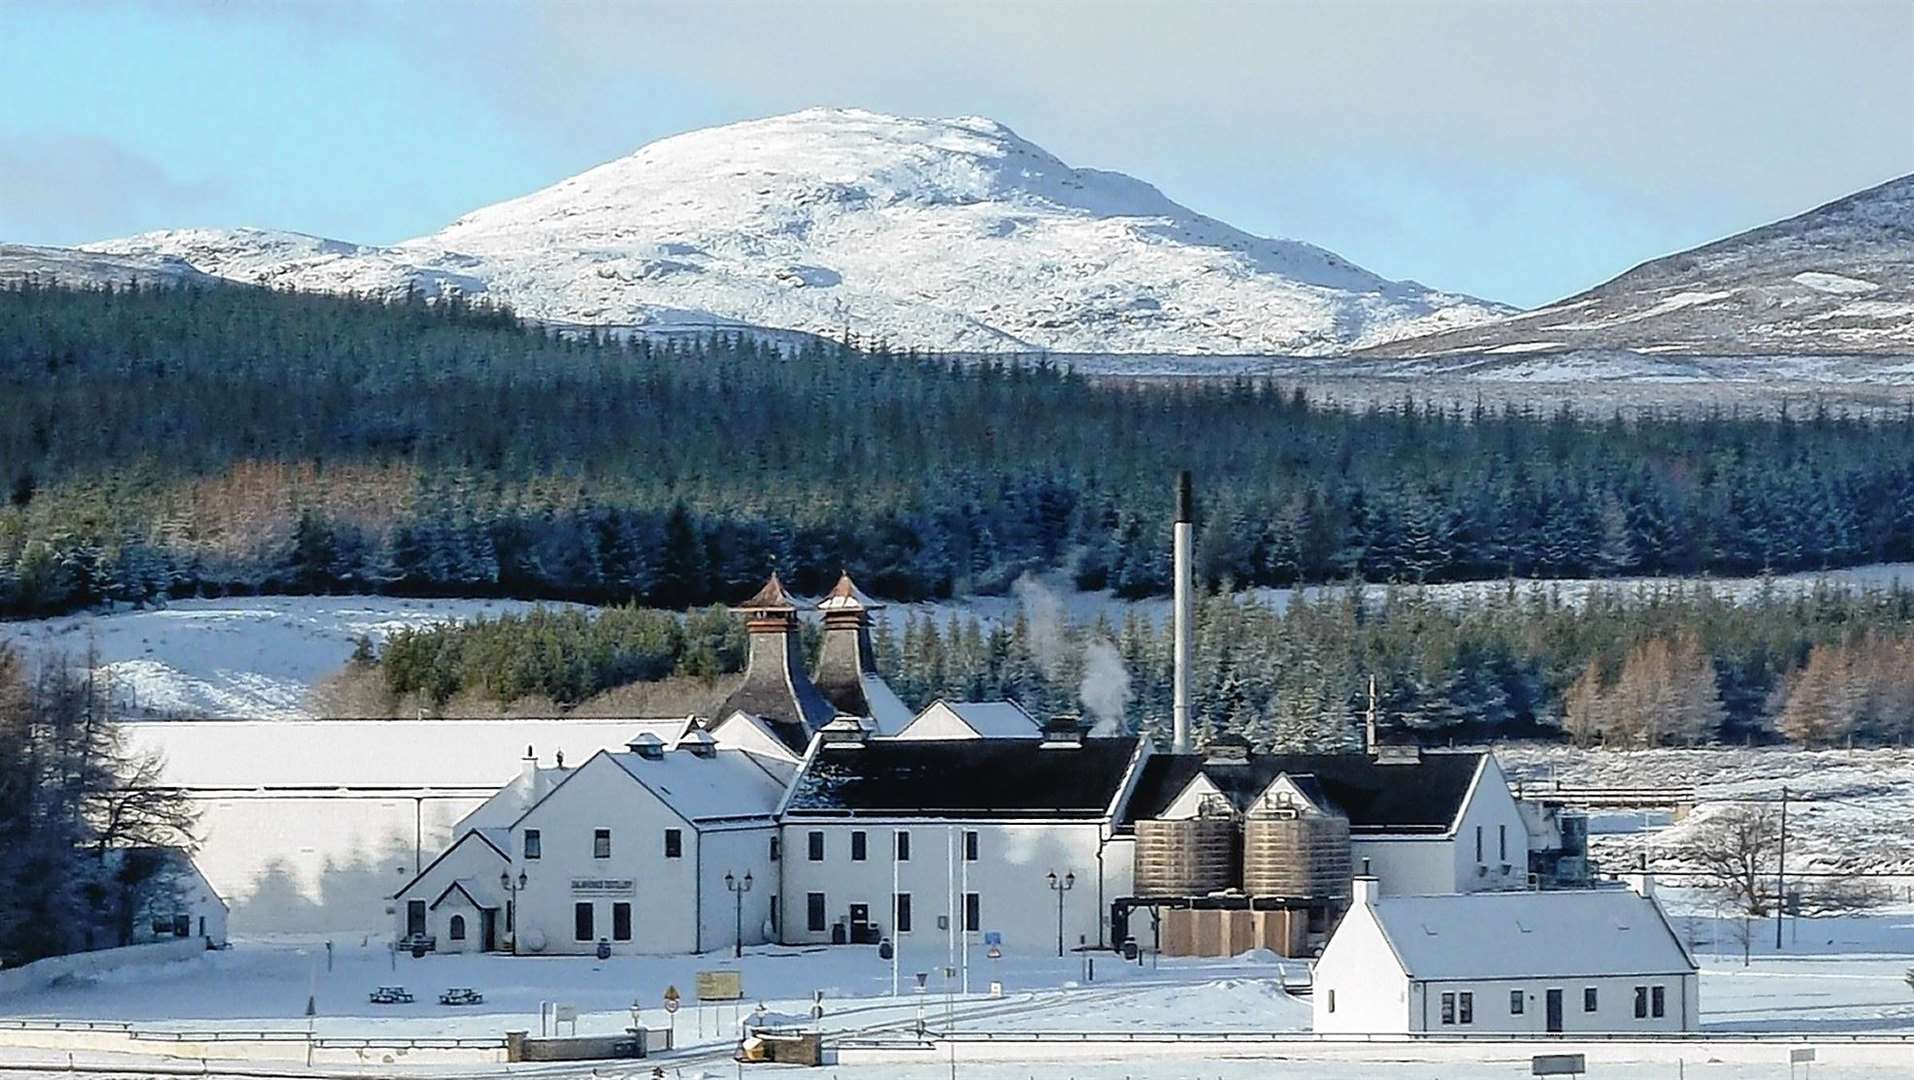 Dalwhinnie Distillery in the snow.